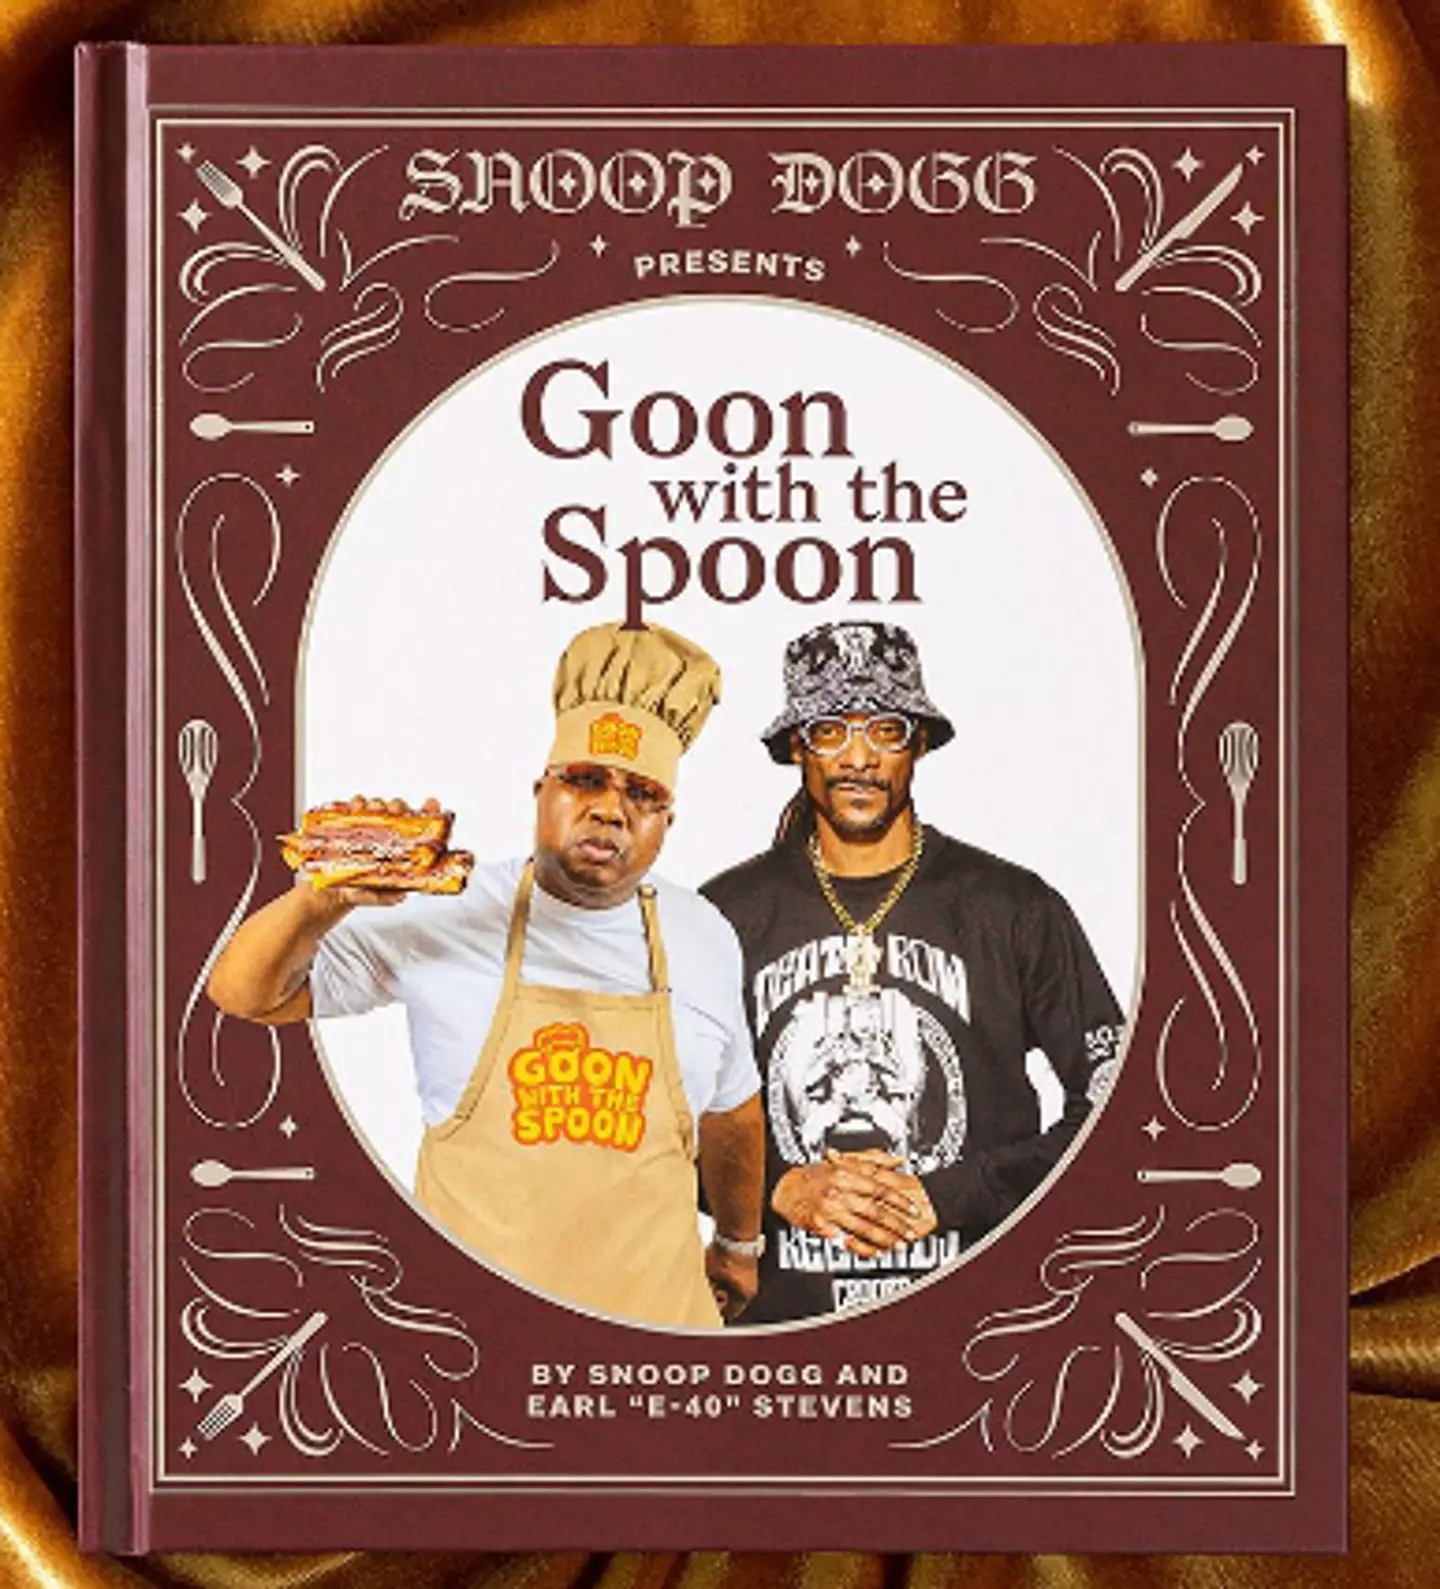 Snoop has even released another cookbook, which is a lot less weed-focused.